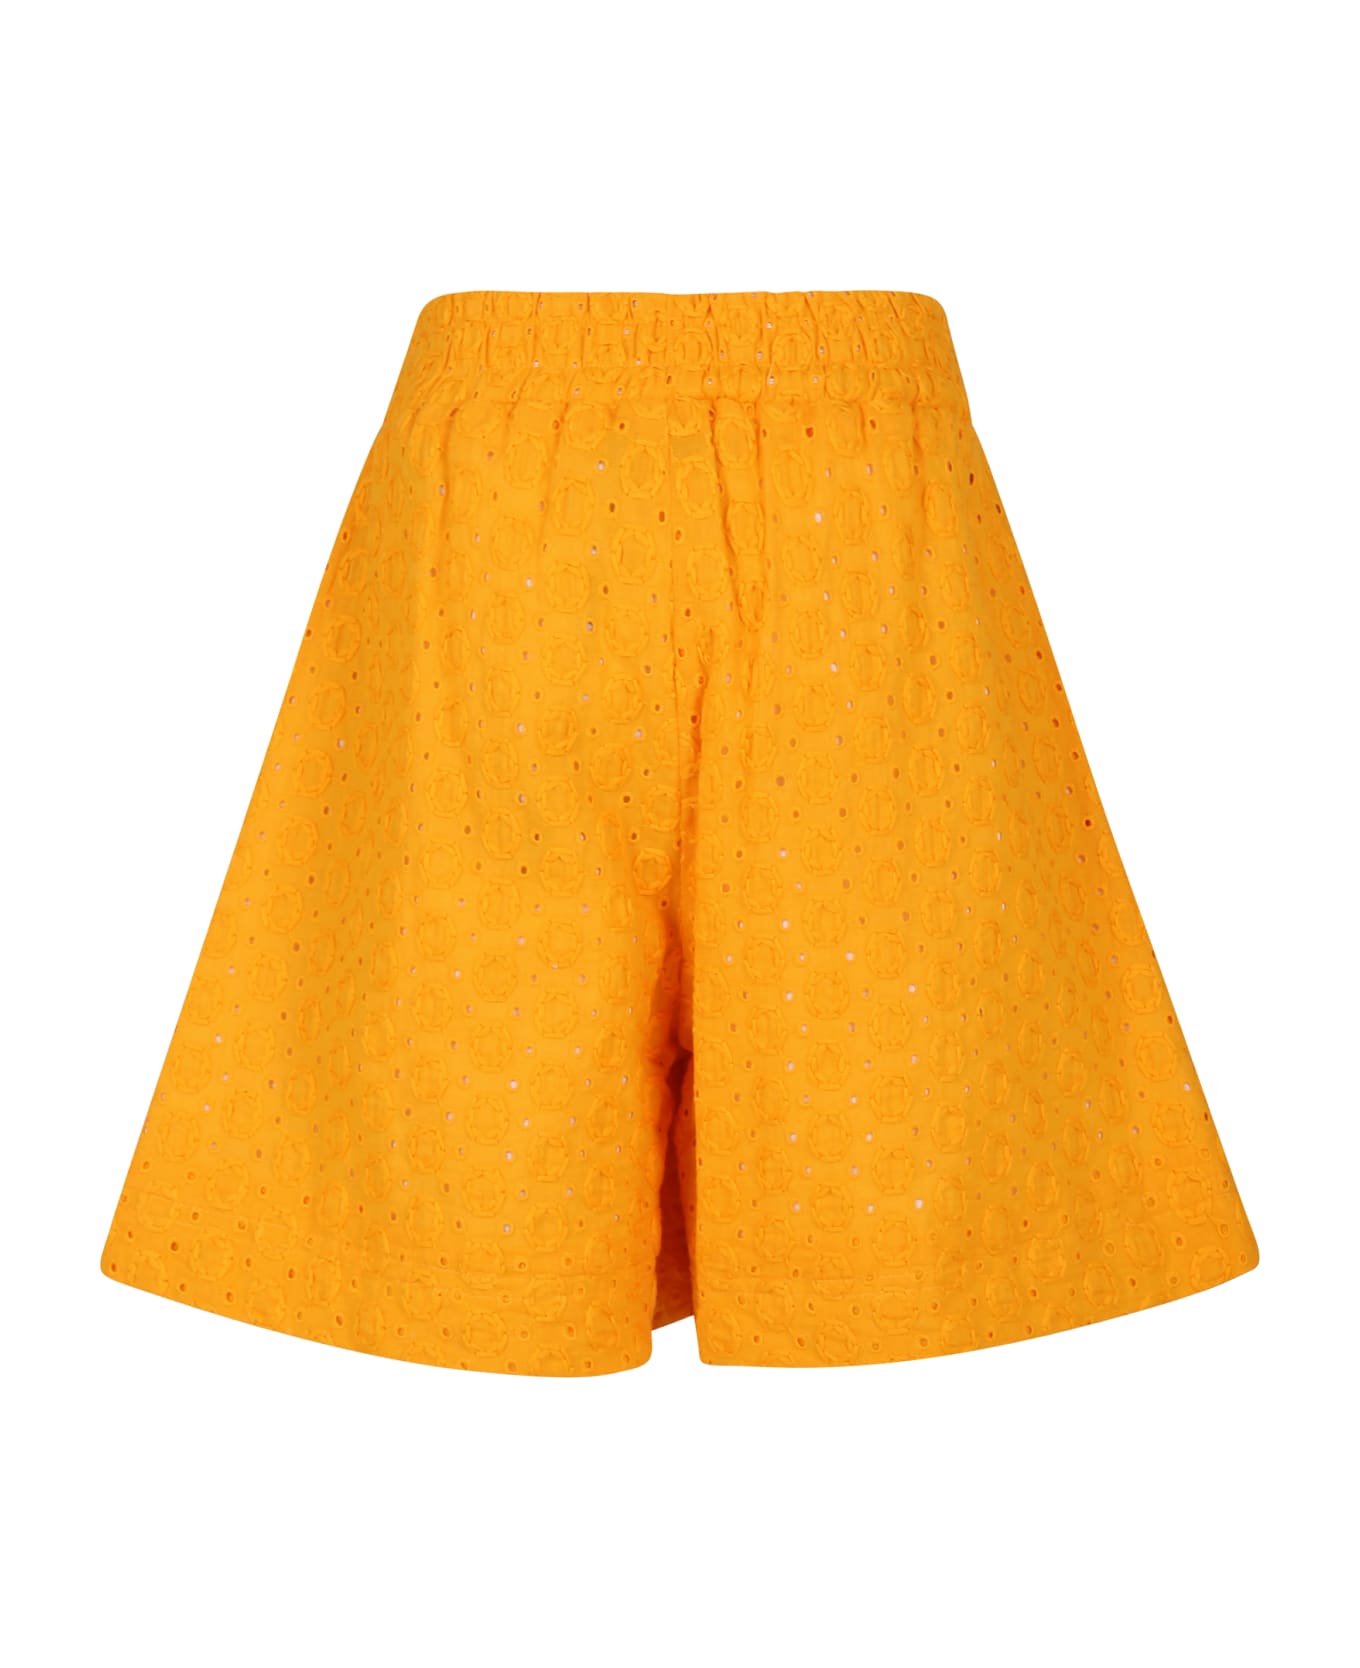 MSGM Orange Short For Girl With Broderie Anglaise - Orange ボトムス